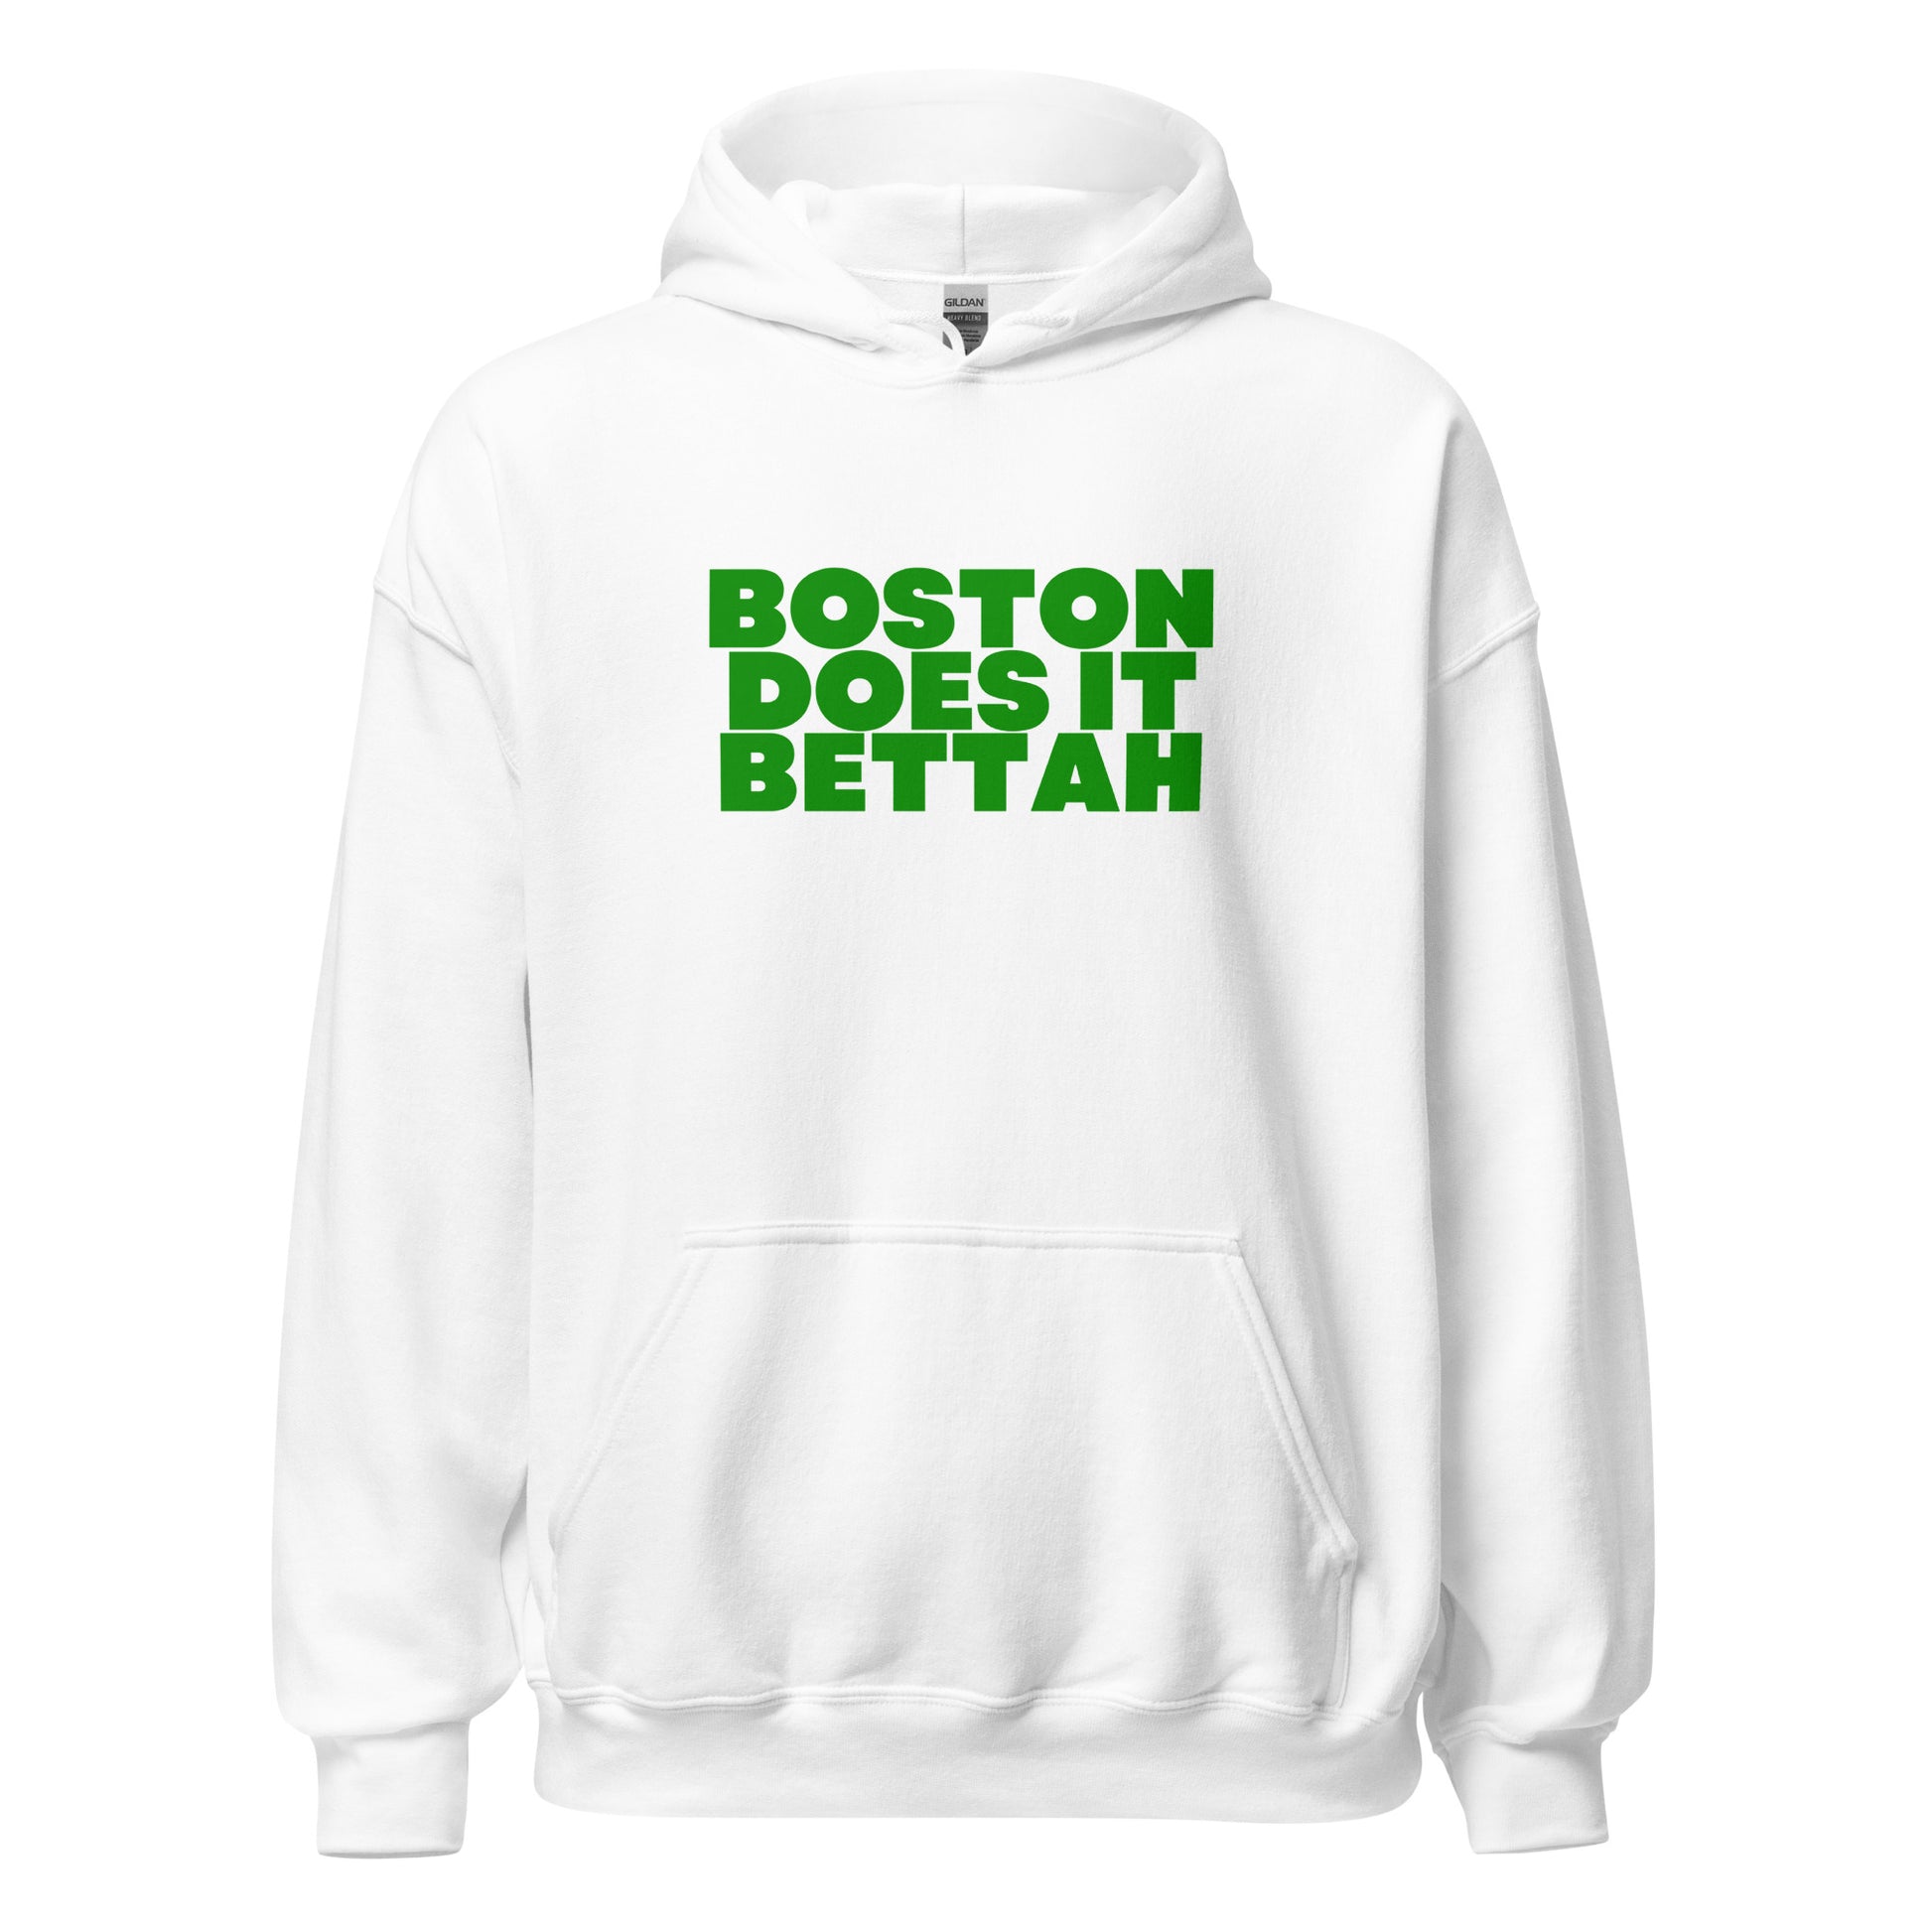 white hoodie that says "Boston Does it Bettah" in green lettering